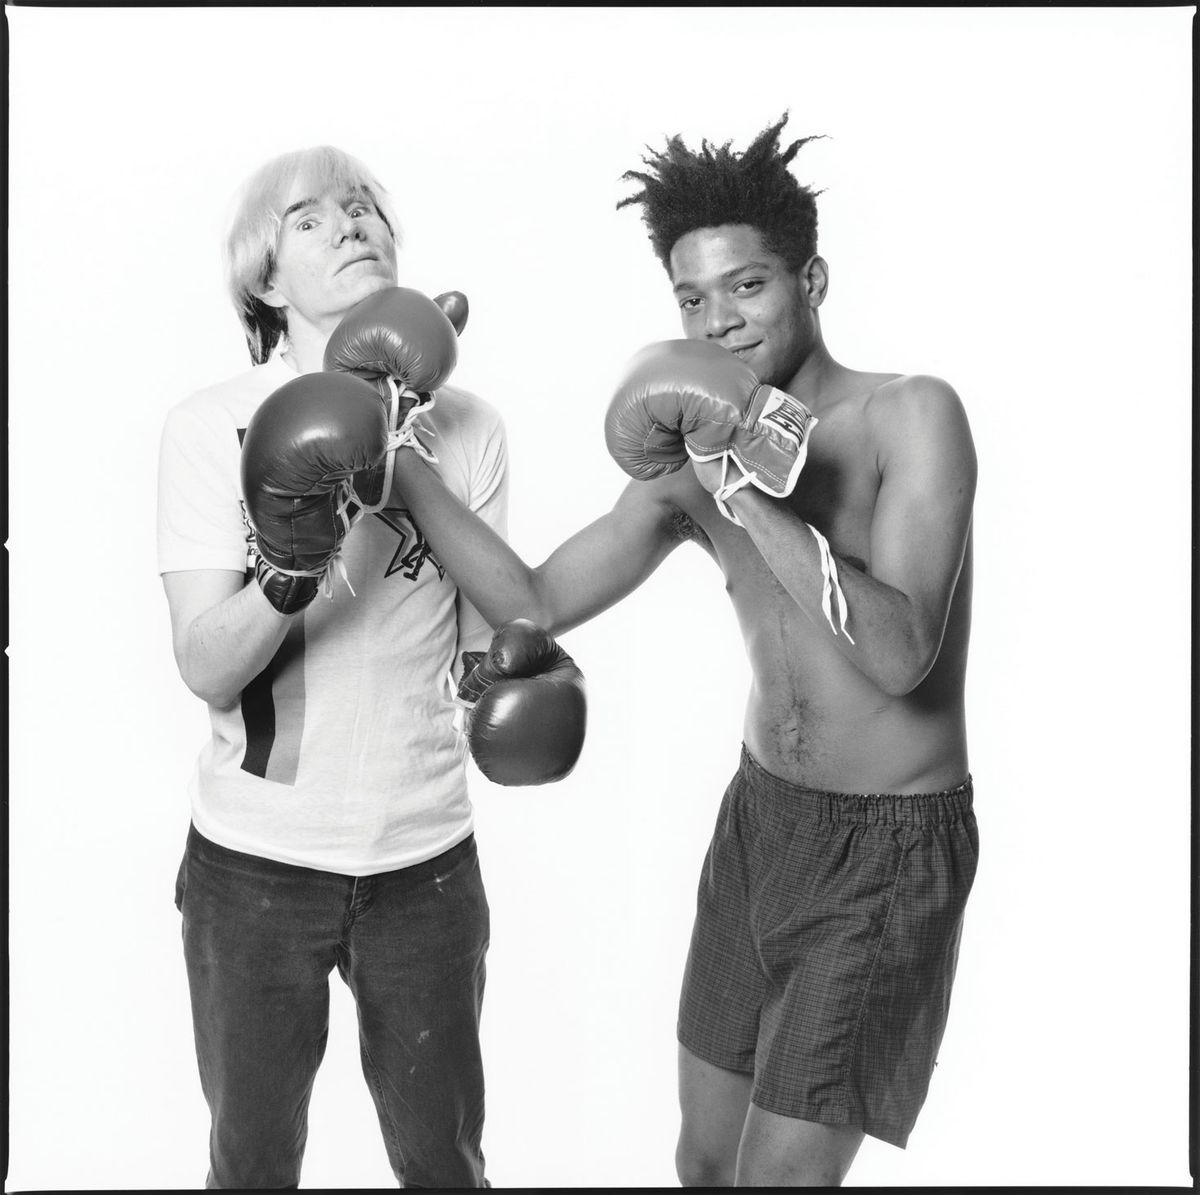 Andy Warhol and Jean-Michel Basquiat's collaboration examined in